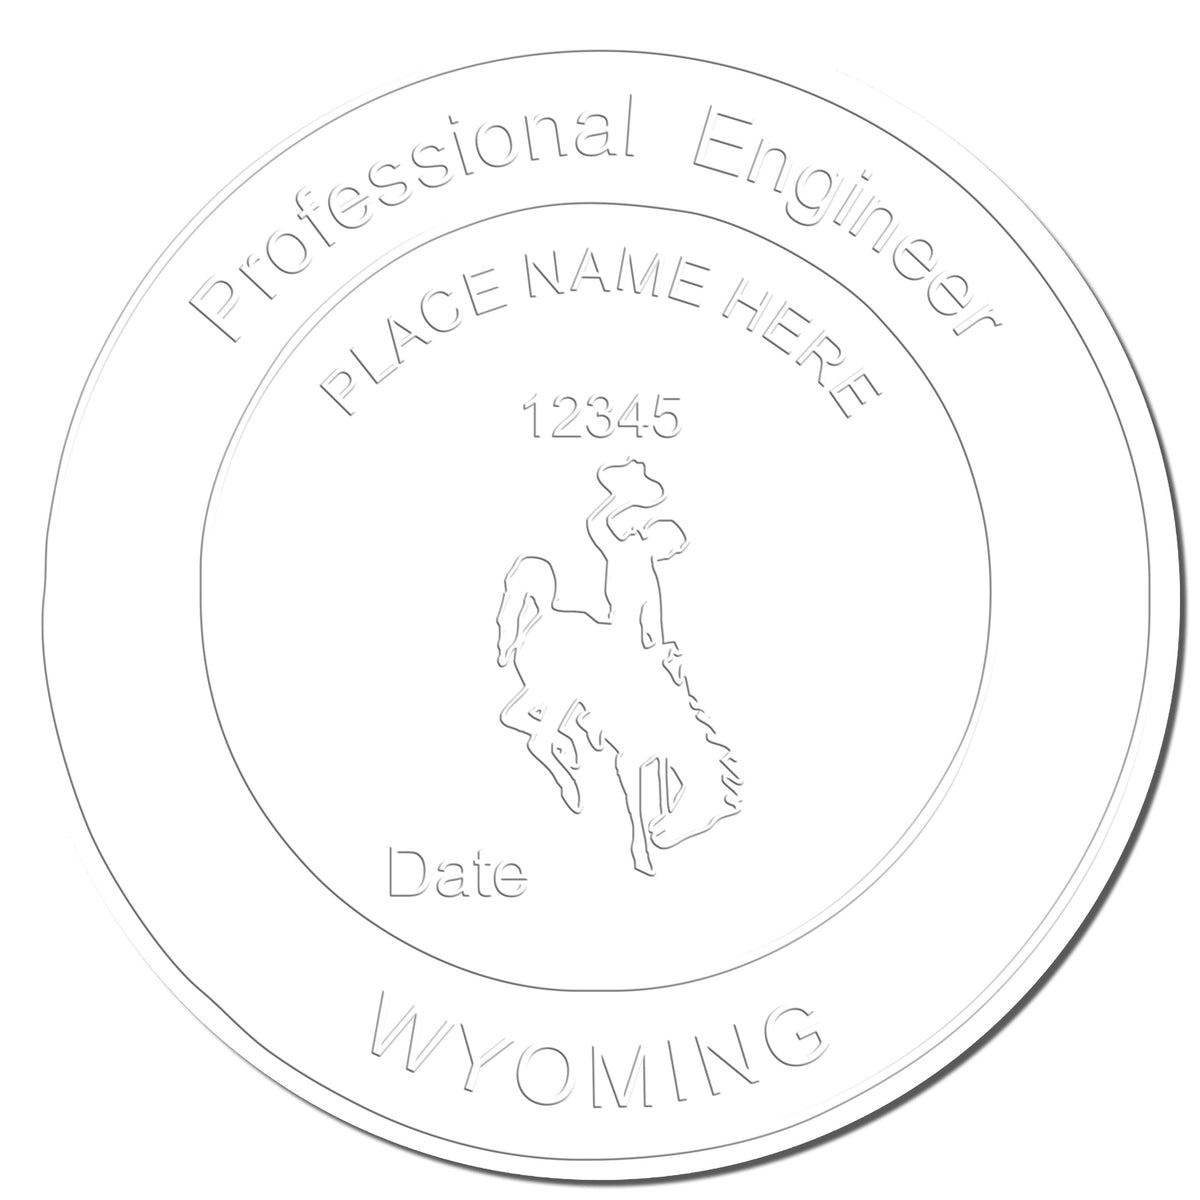 This paper is stamped with a sample imprint of the Hybrid Wyoming Engineer Seal, signifying its quality and reliability.